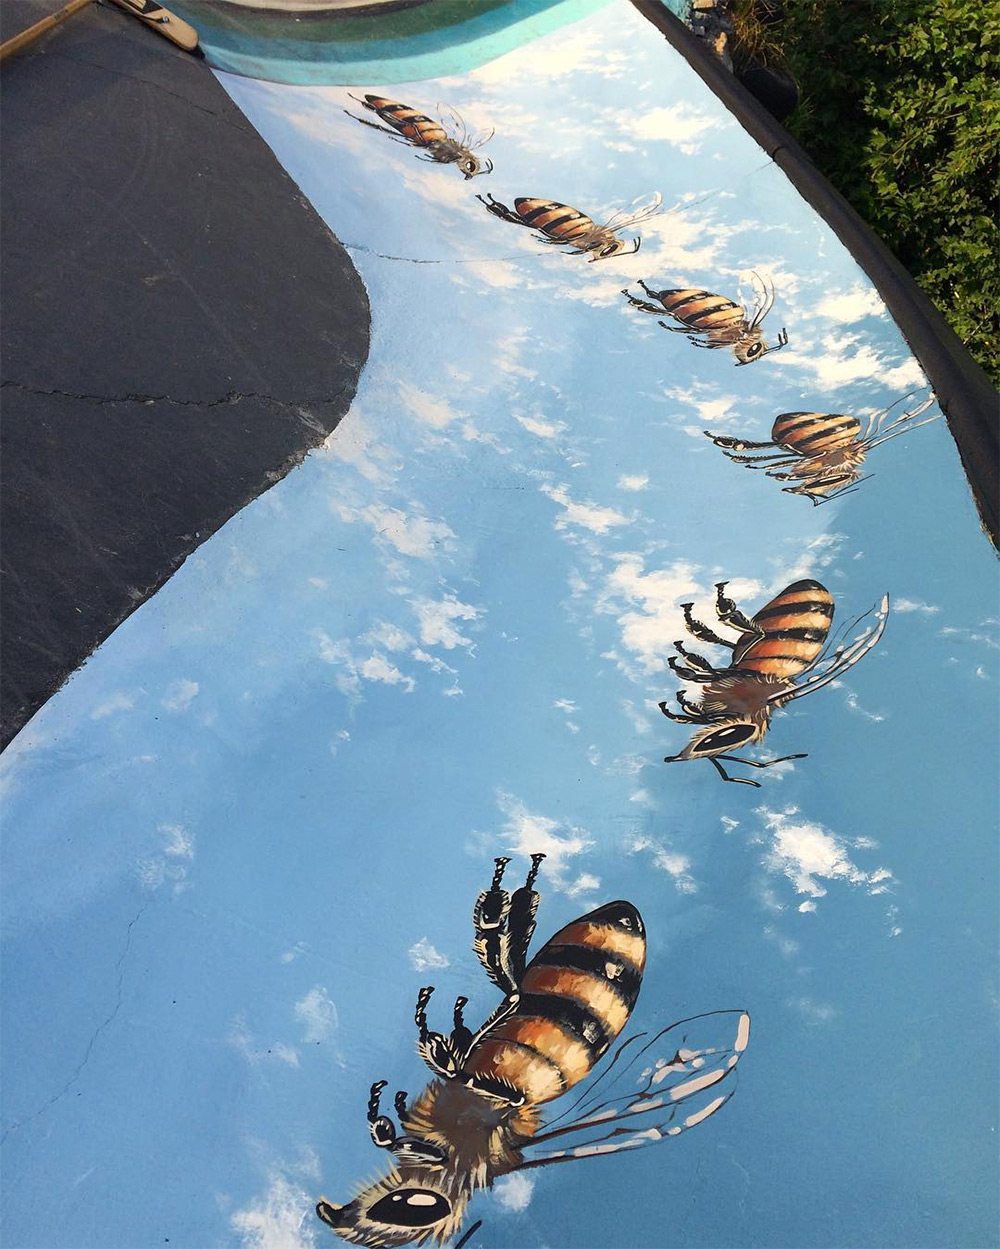 50,000 bees for The Good of the Hive - by MATT WILLEY